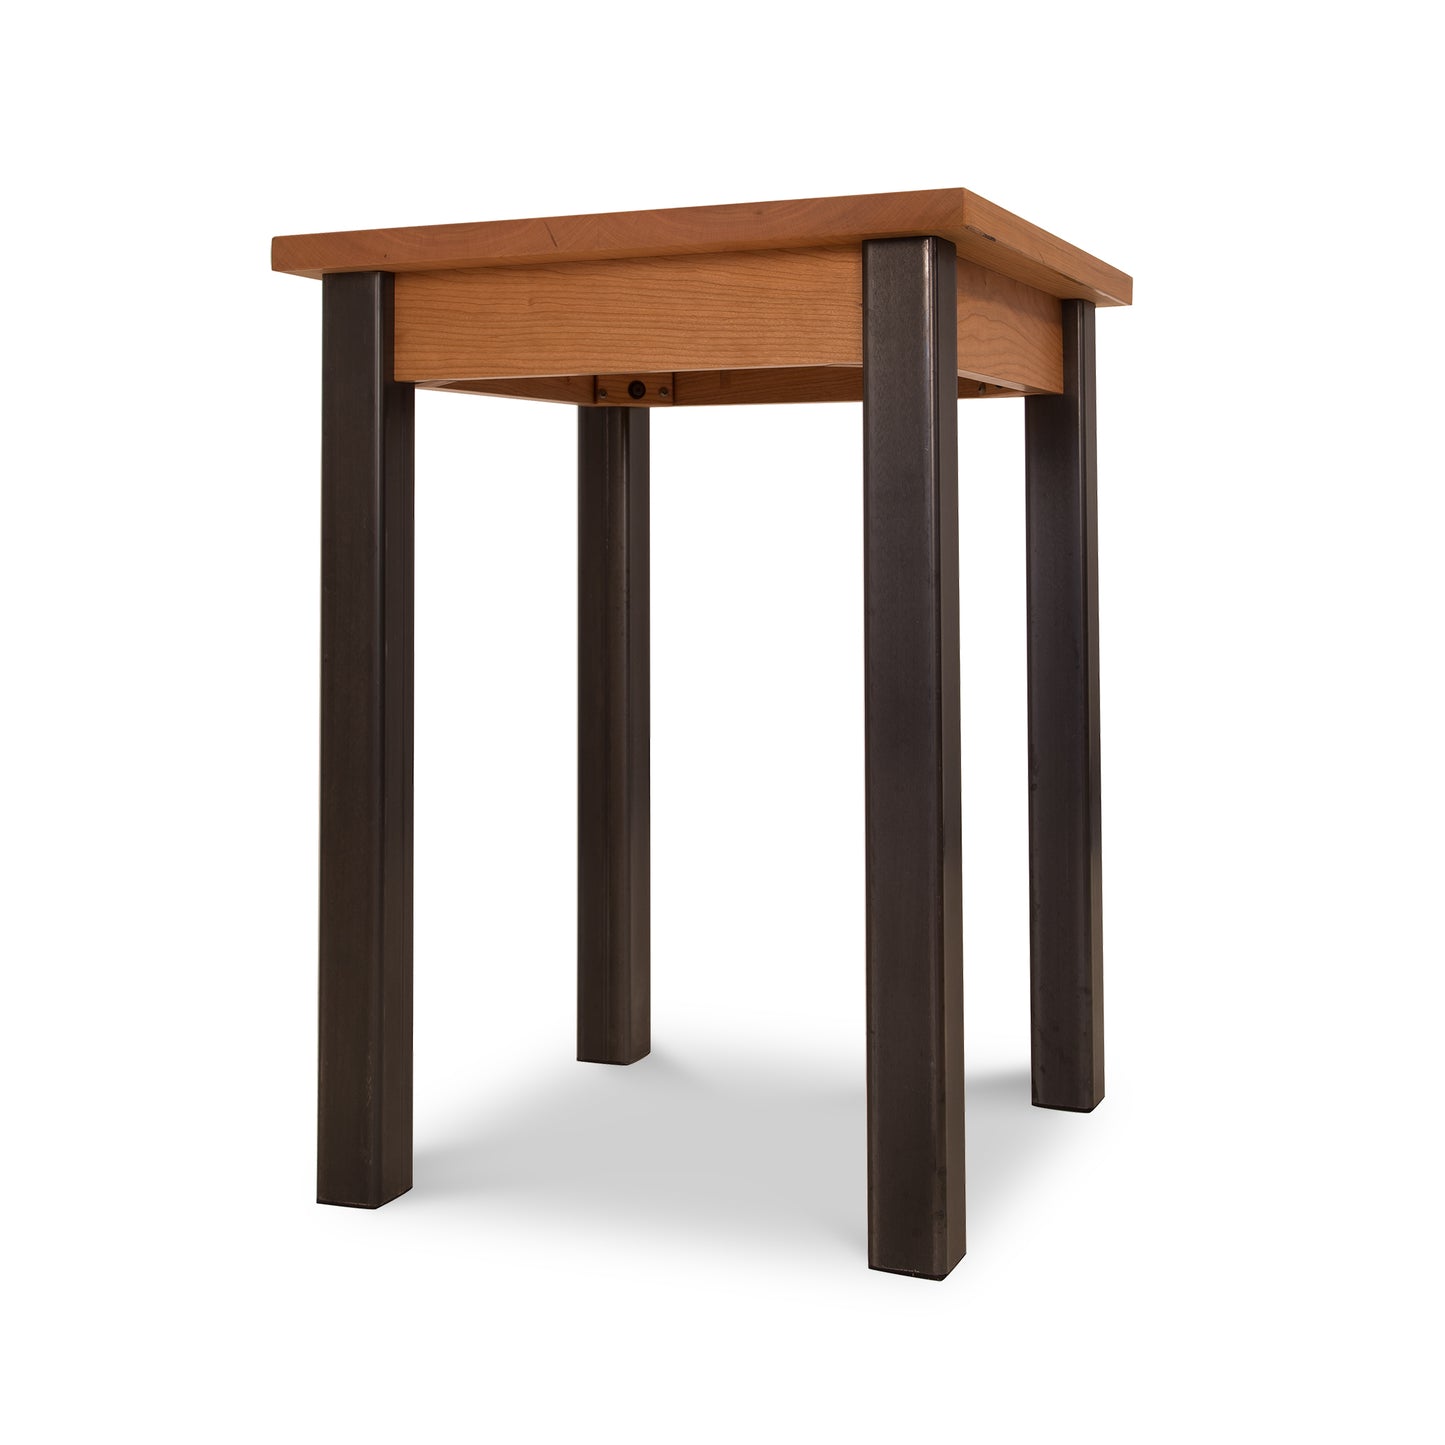 A Lyndon Furniture Contemporary Farmhouse End Table - Clearance with black legs and a wooden top.